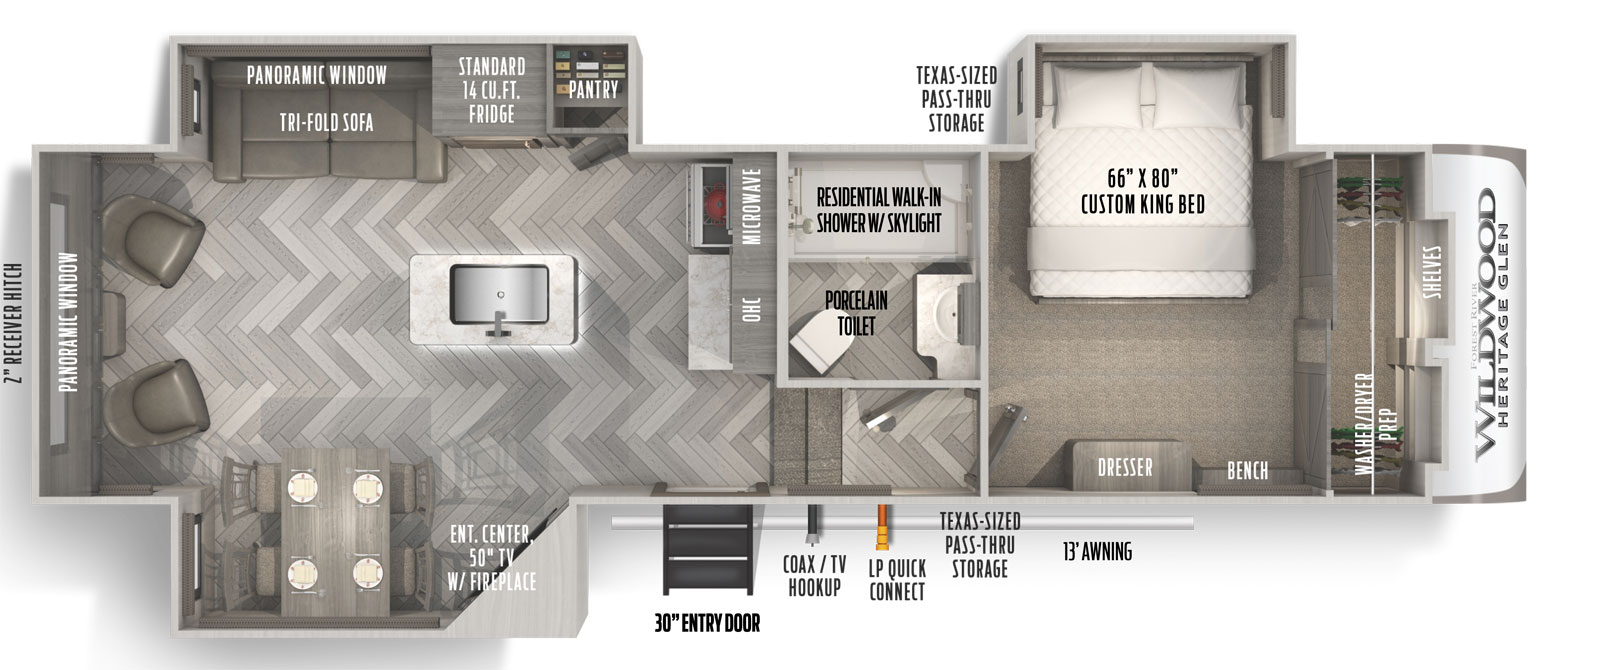 Heritage Glen 286RL floorplan. The 286RL has 3 slide outs and one entry door.